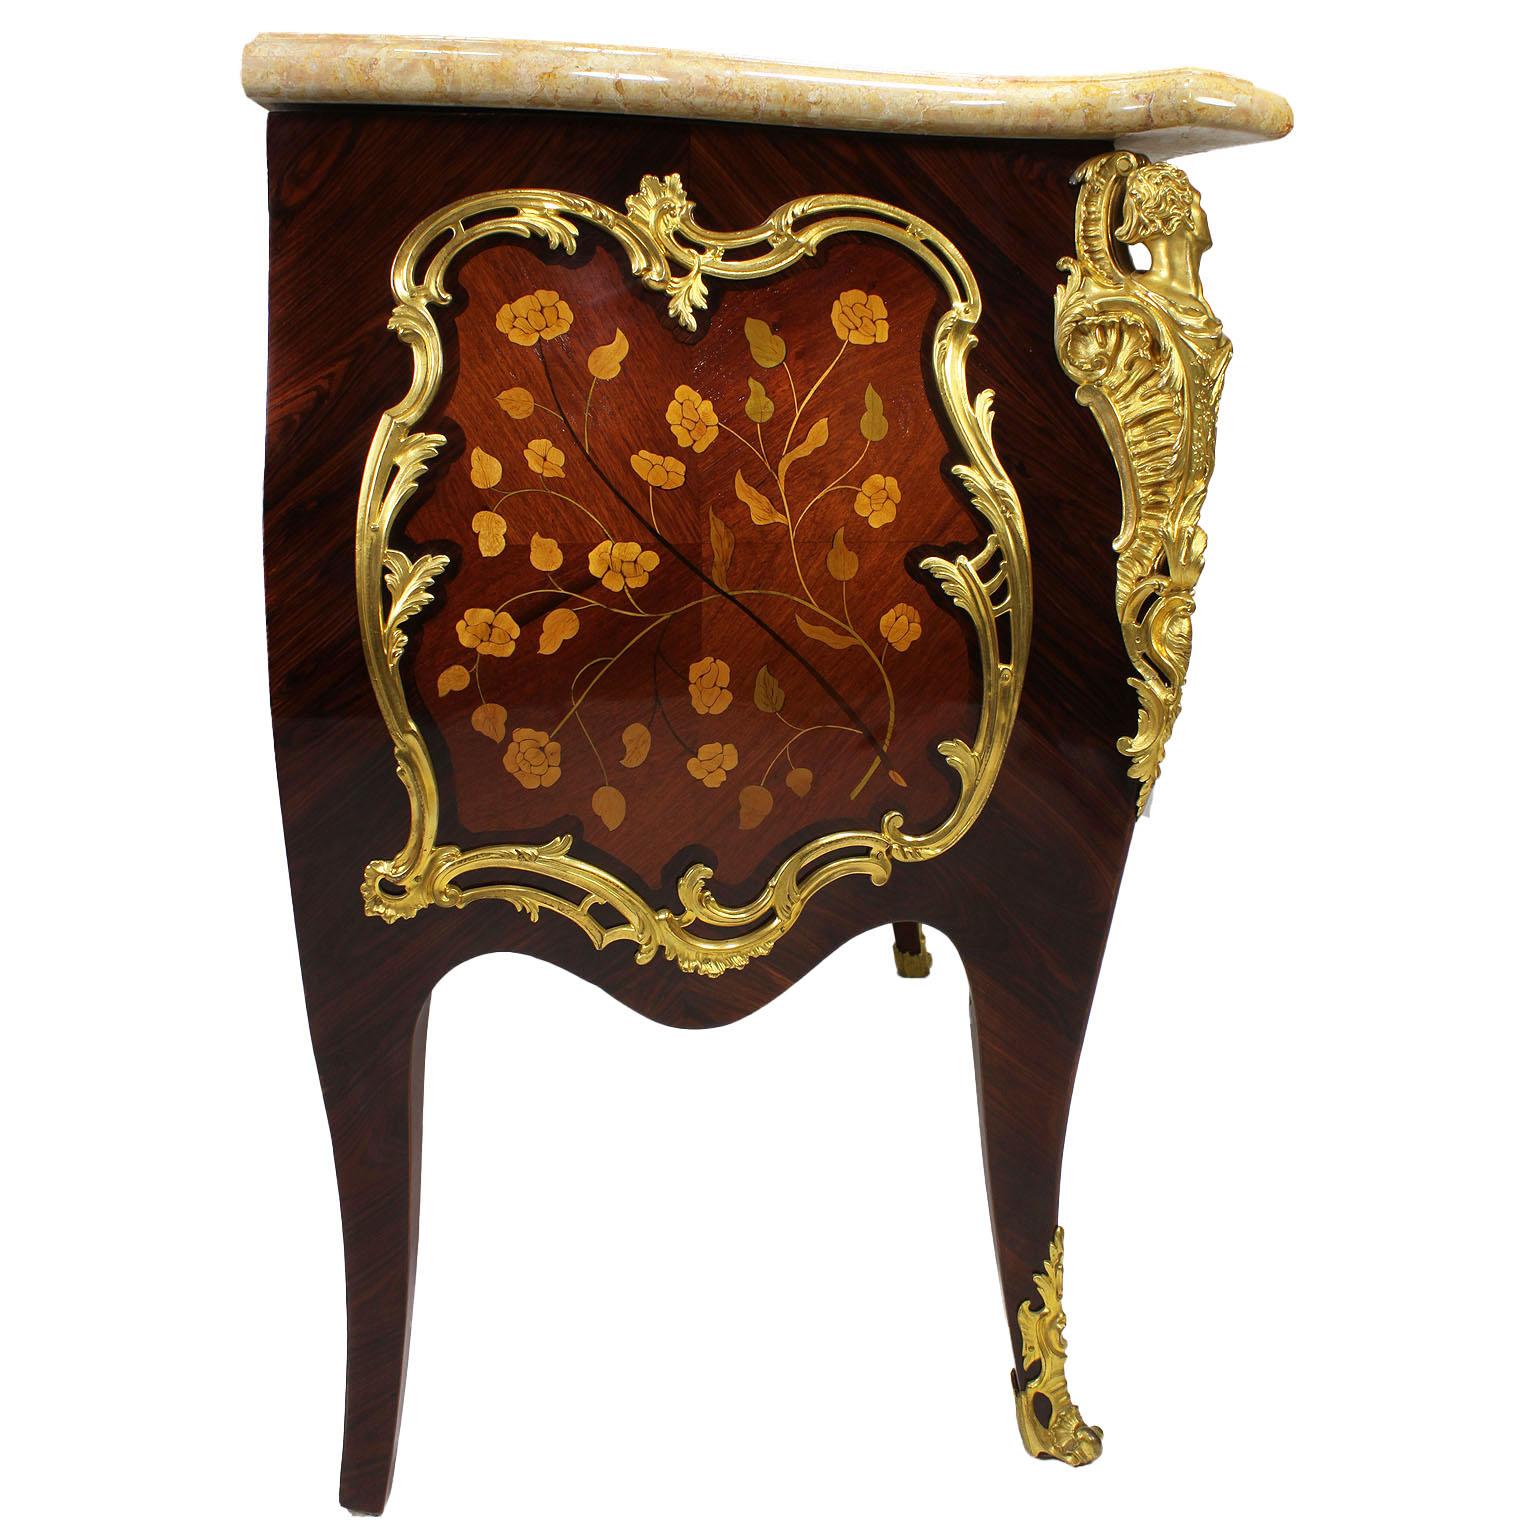 French 19th Century Louis XV Style Gilt Bronze-Mounted Marquetry Commodes, Pair For Sale 12